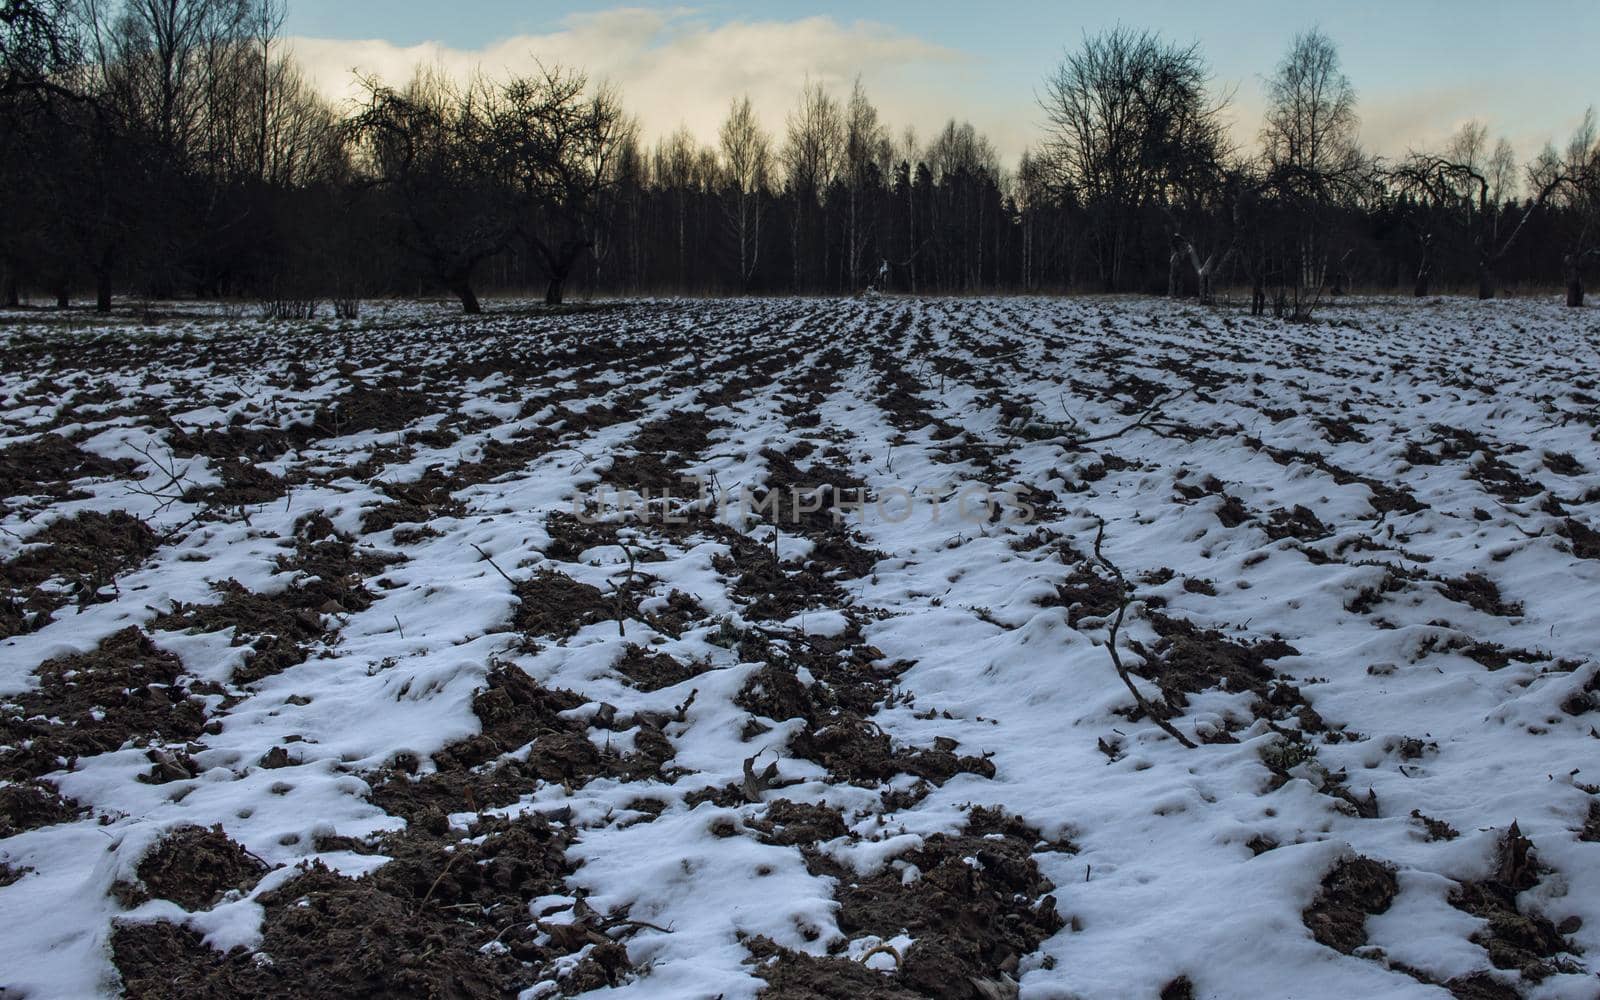 Potato field in winter, perspective view by scudrinja